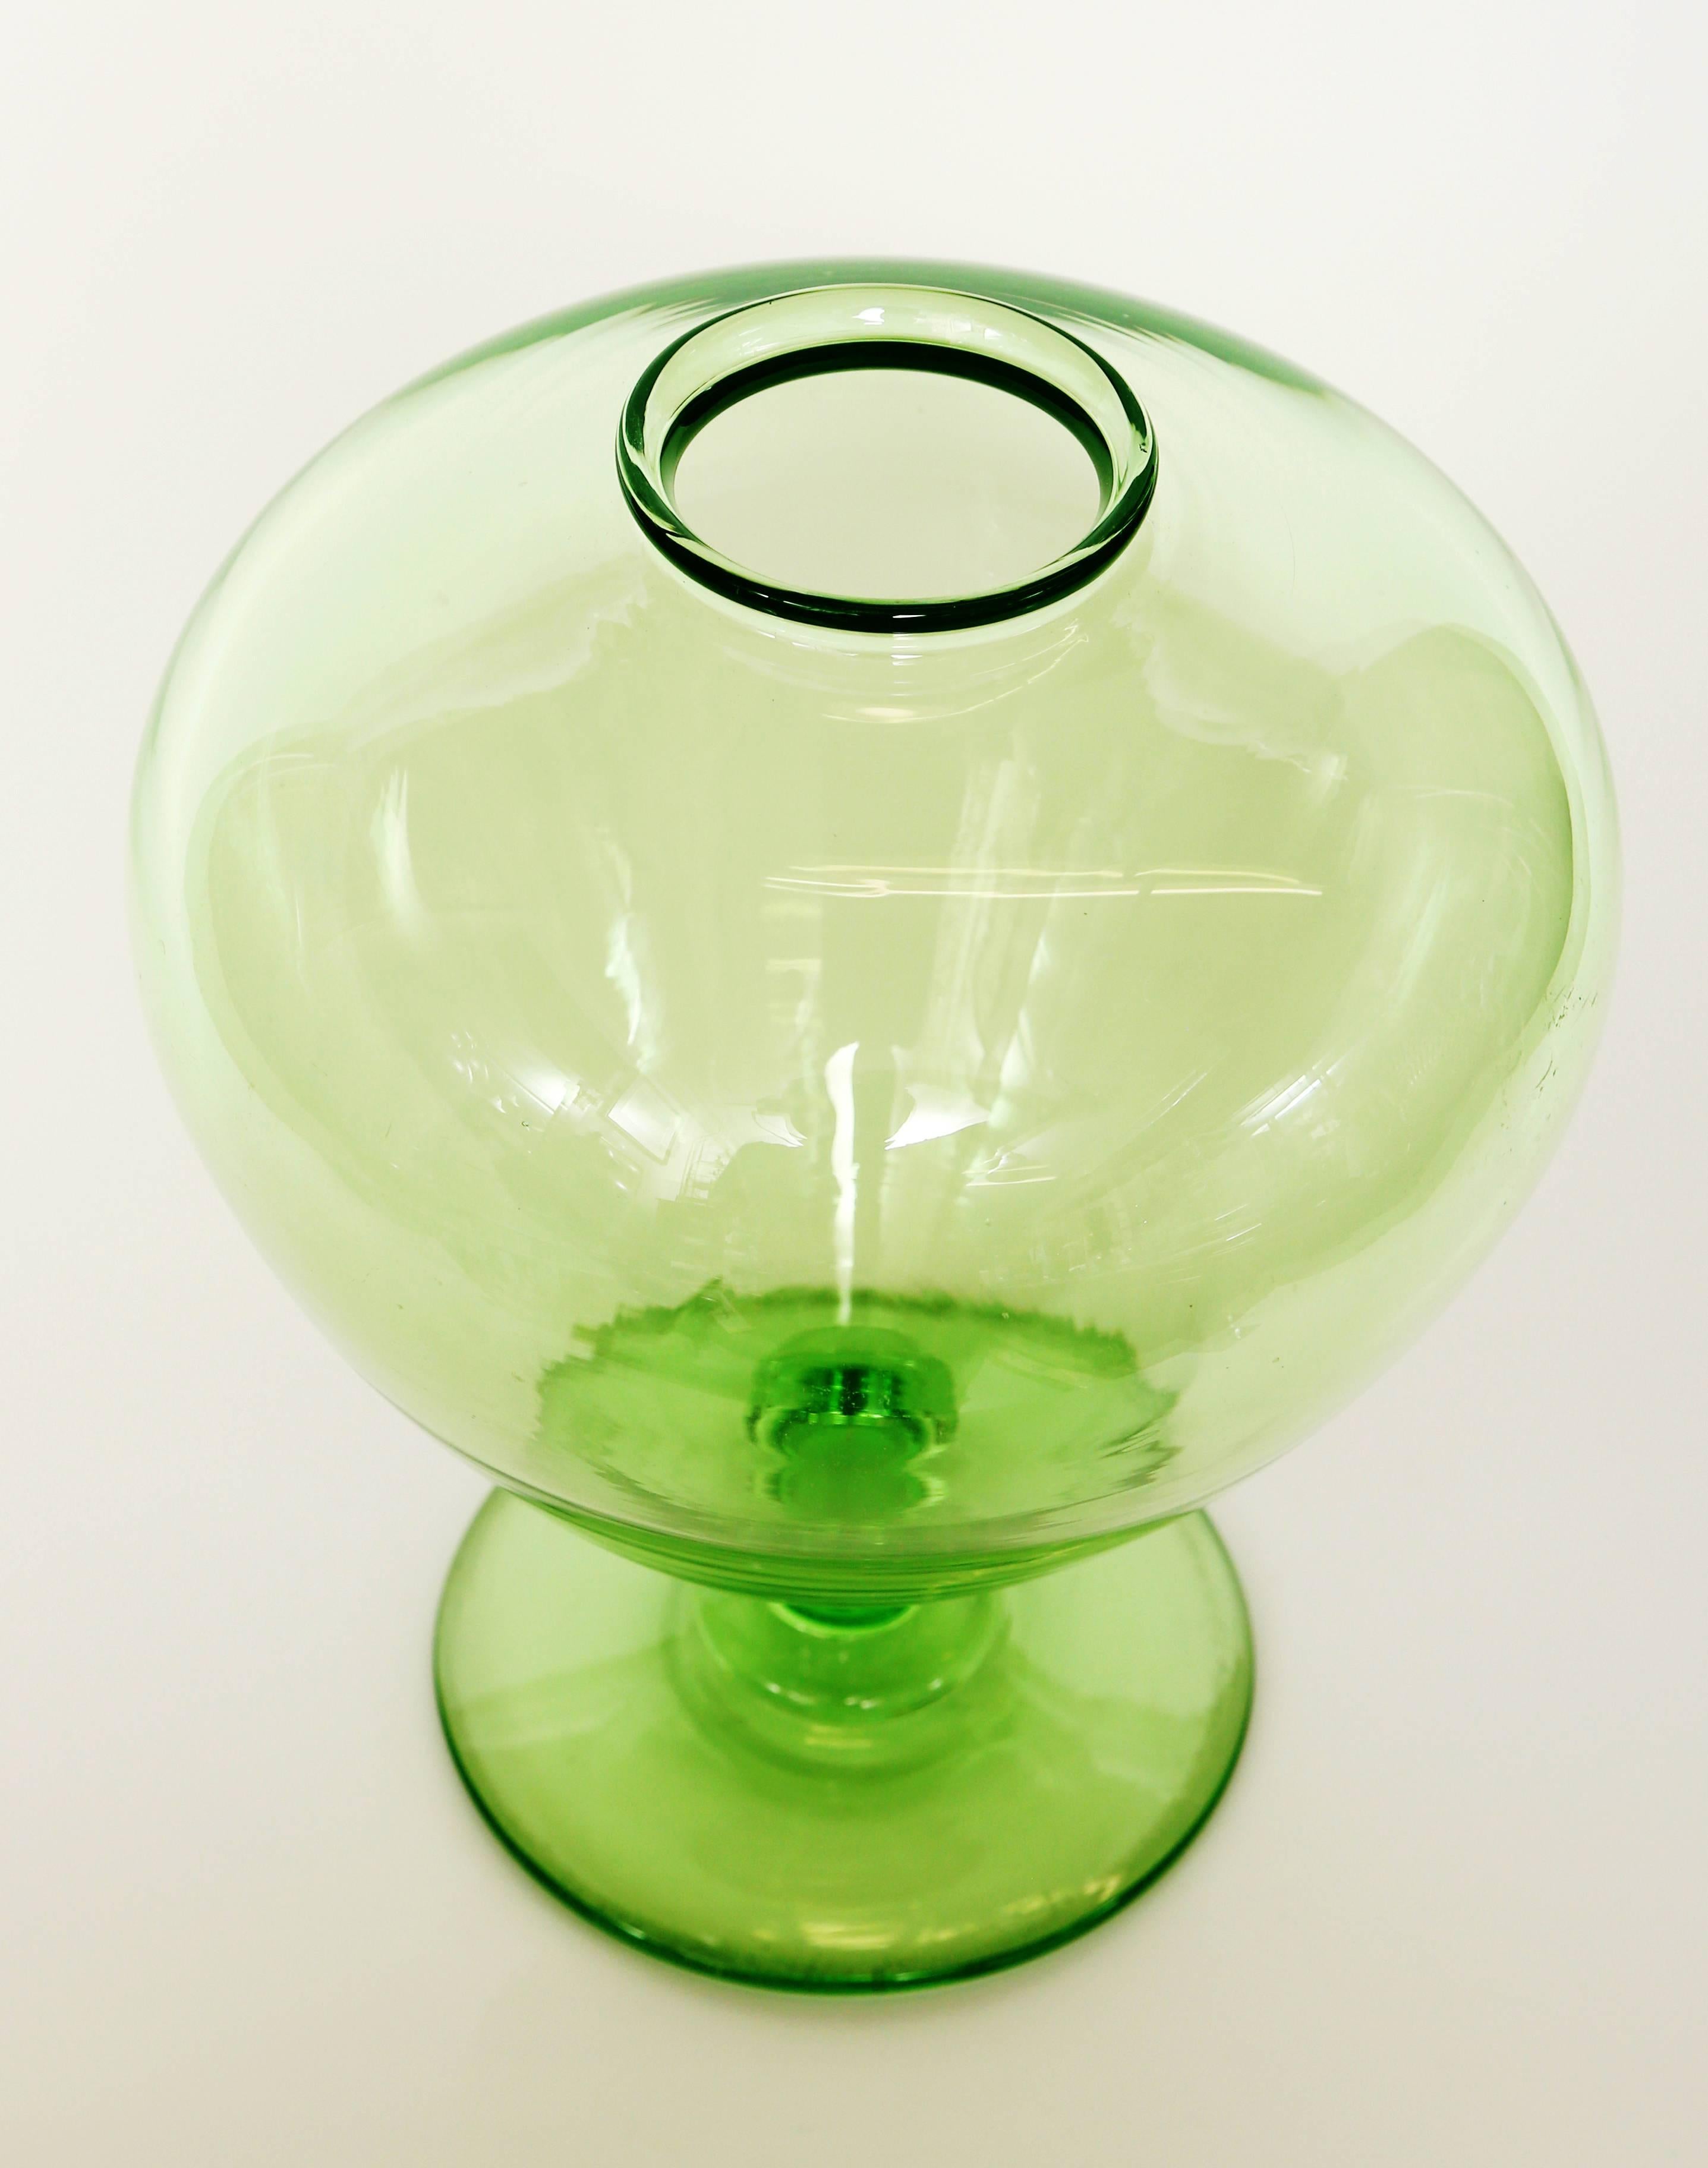 This beautiful apple green vase was hand blown in the Venetian style.   The bulbous form has a narrow neck,  stem and foot with a polished pontil on the underside.  Due to the short duration of production Union Glass is desirable to collectors and